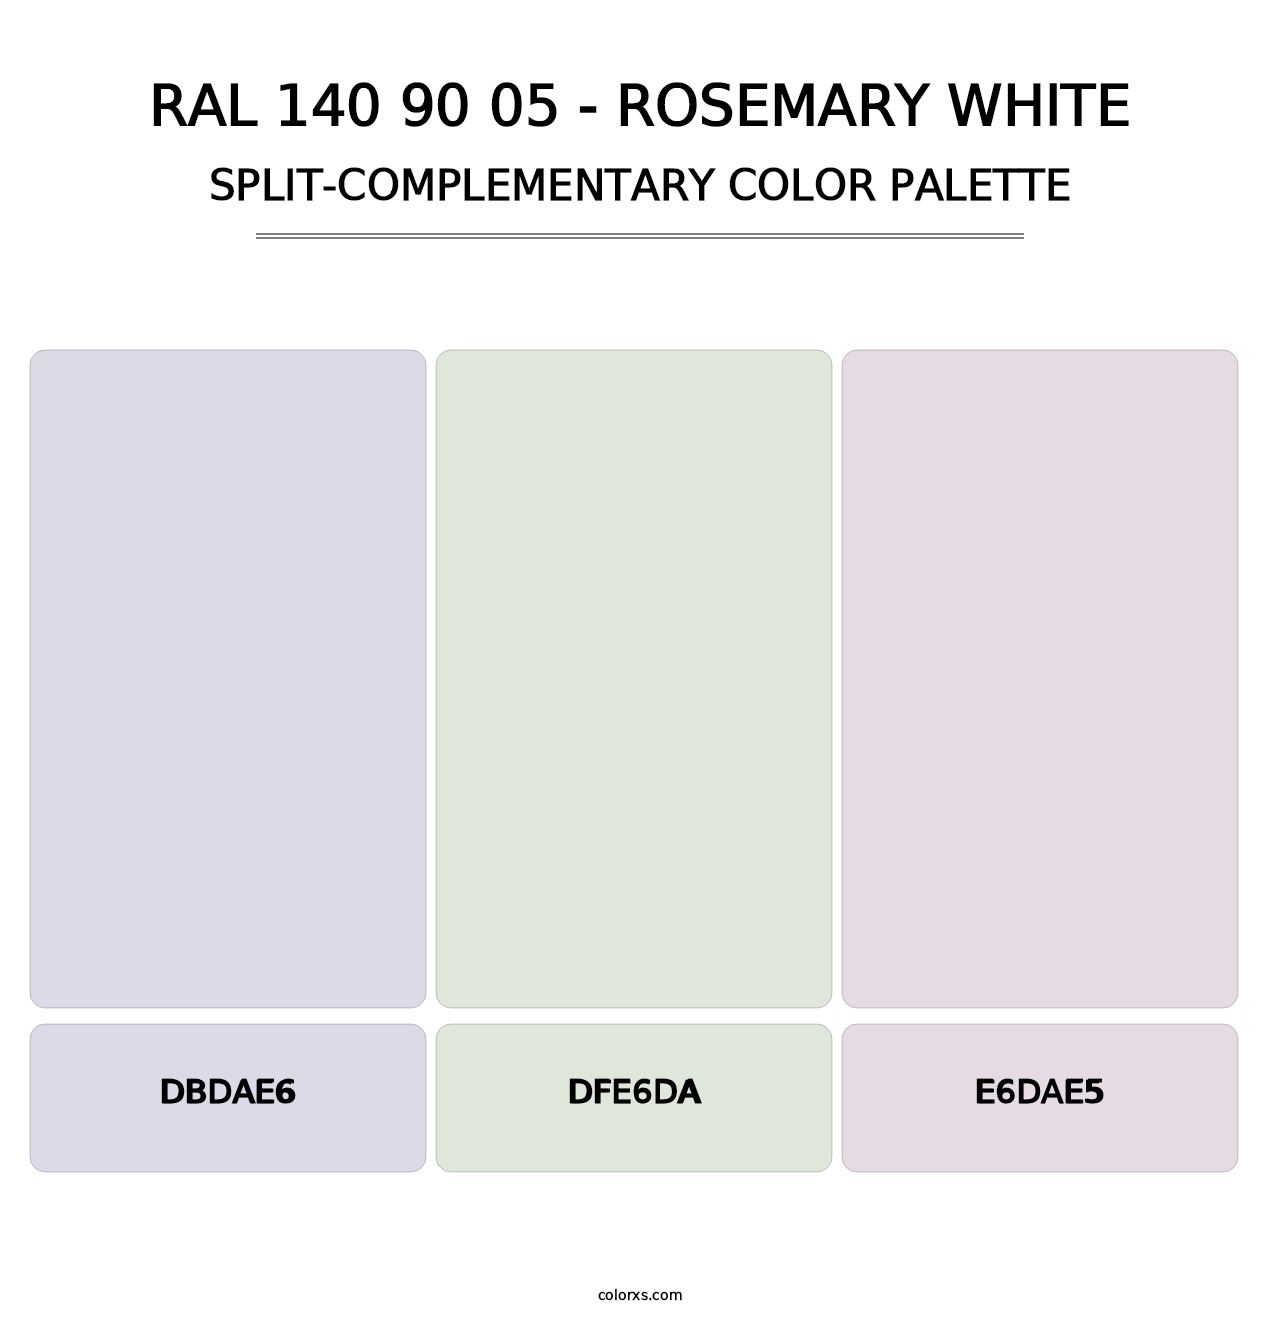 RAL 140 90 05 - Rosemary White - Split-Complementary Color Palette